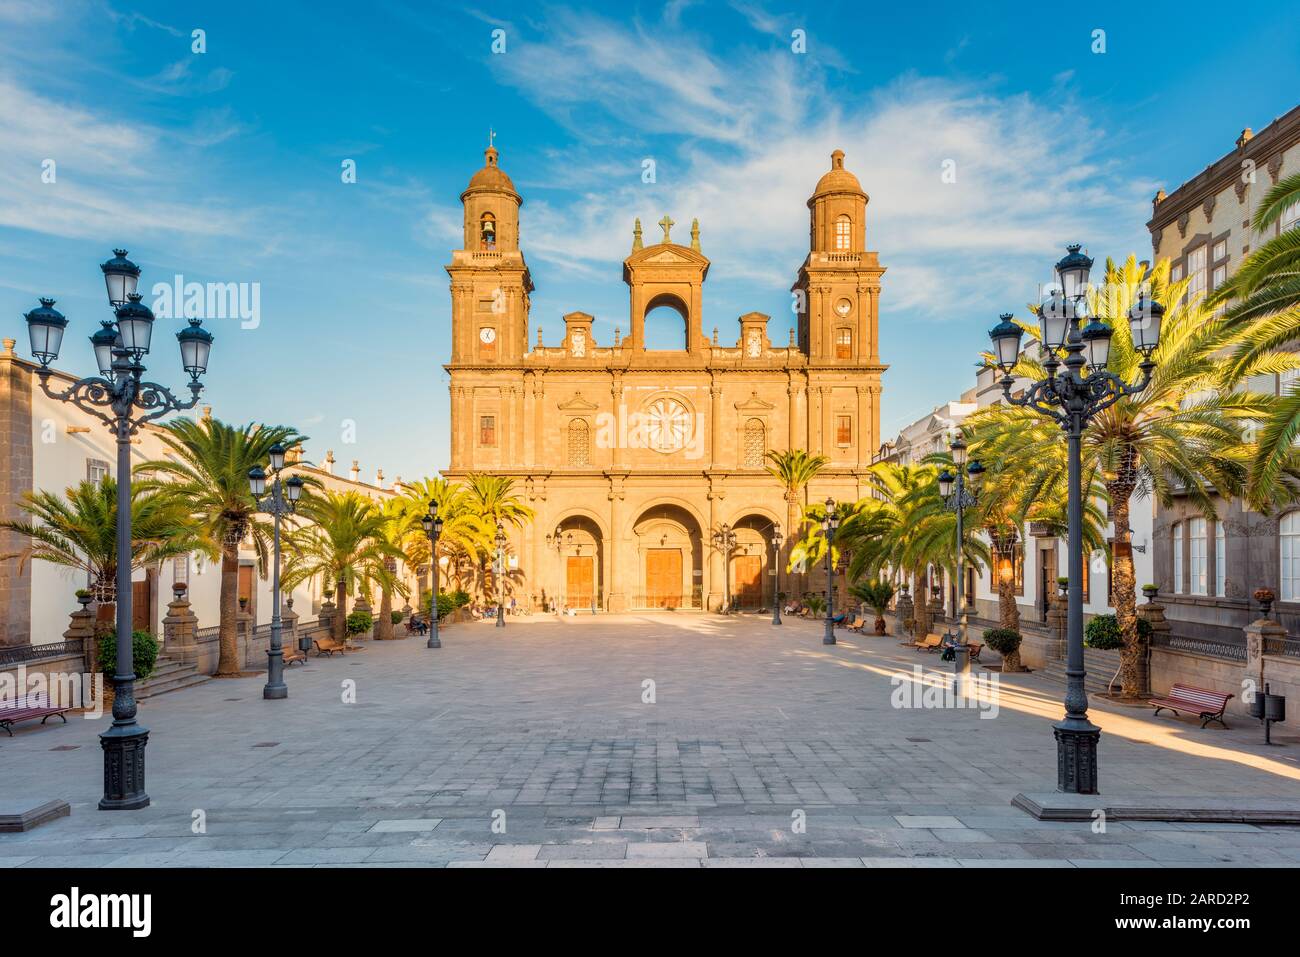 Cathedral of Santa Ana in Las Palmas de Gran Canaria, capital of Gran Canaria, Canary Islands, Spain. Construction started in 1500 and lasted for 4 ce Stock Photo